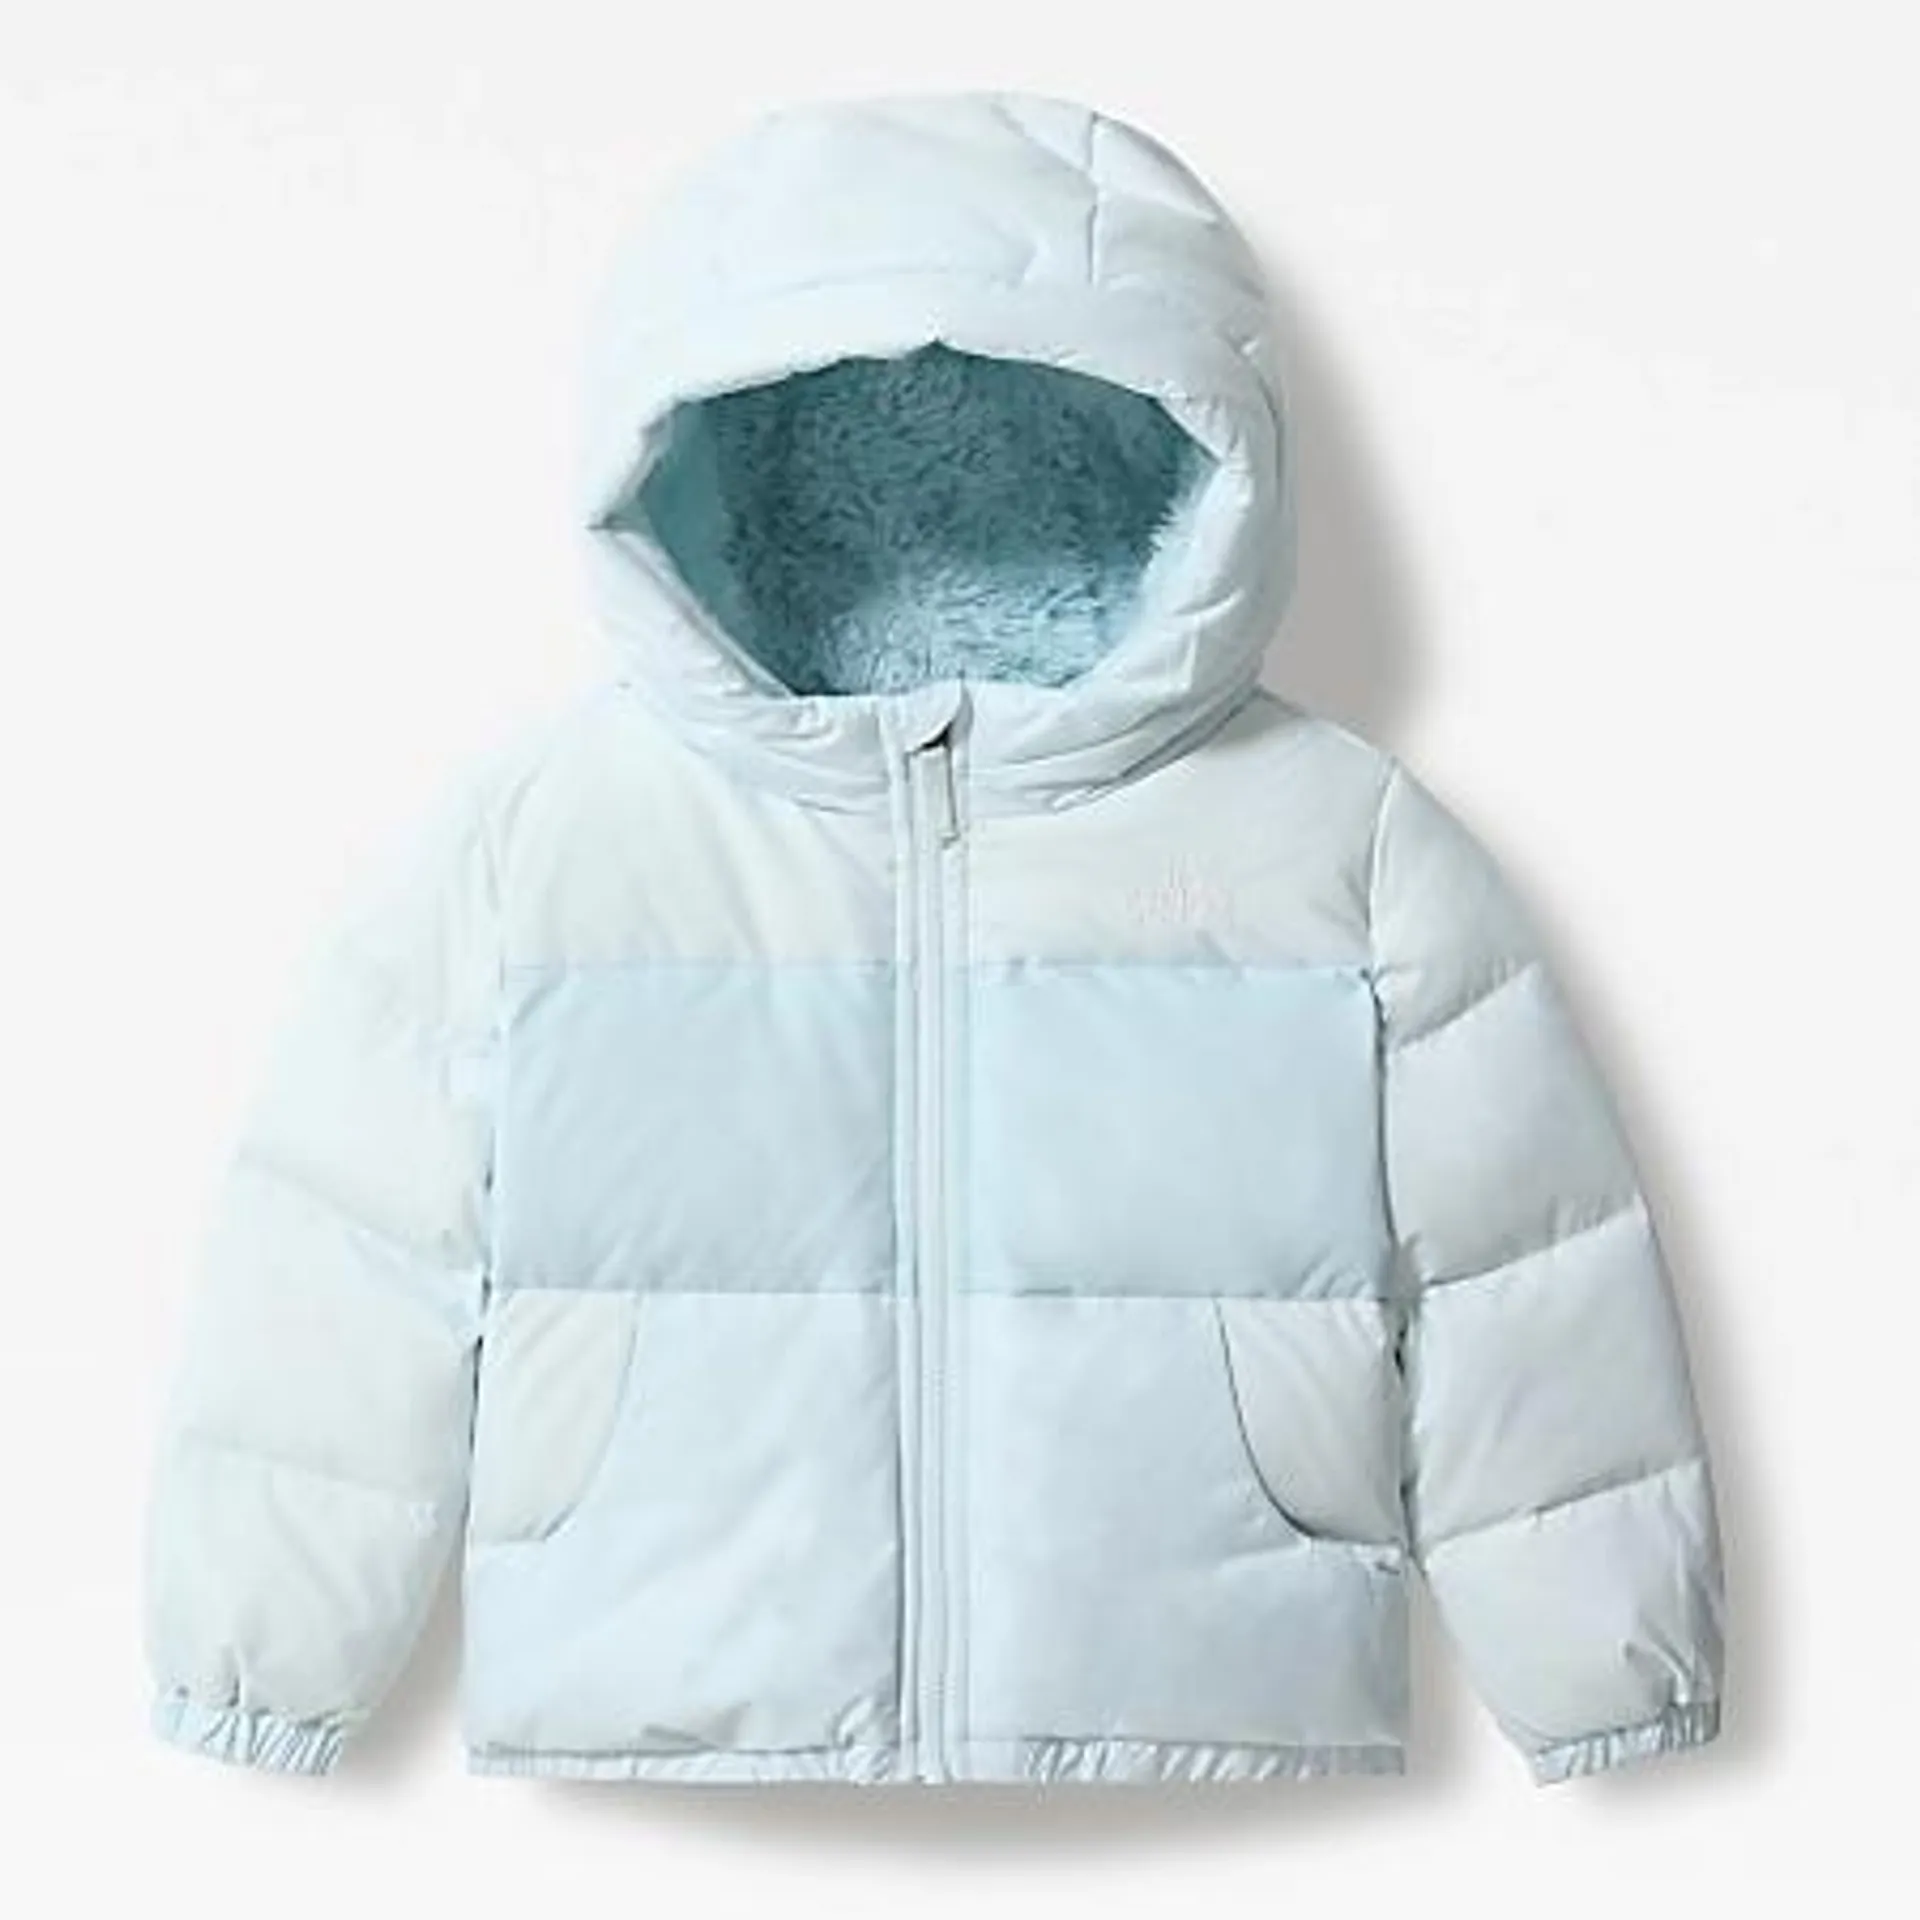 WE NO LONGER CARRY THE Kids' Moondoggy Down Jacket YOU ARE LOOKING FOR.